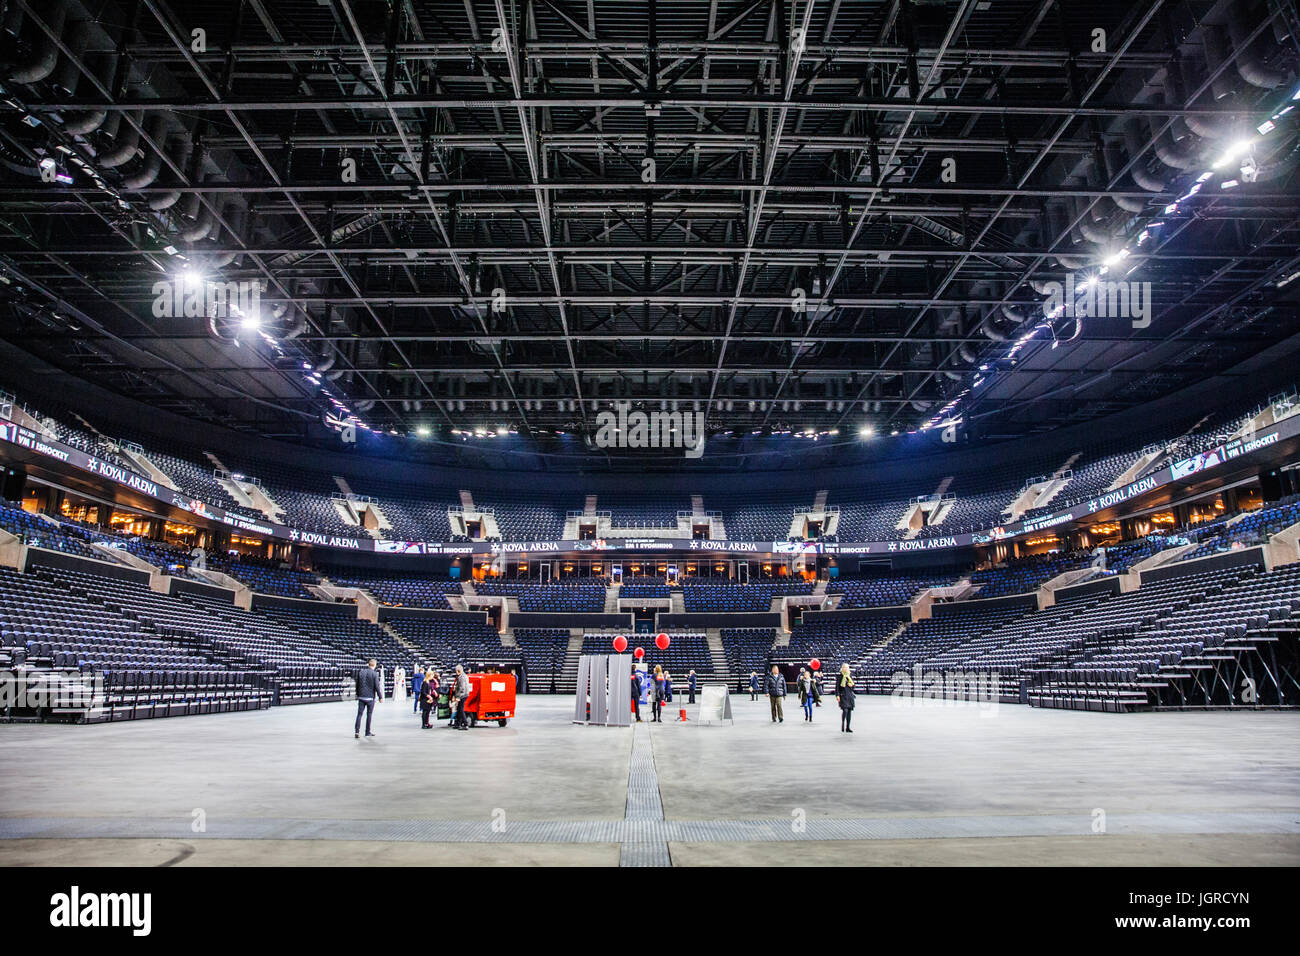 Inside the Royal Arena, which is an indoor cultural meeting place in Stock  Photo - Alamy